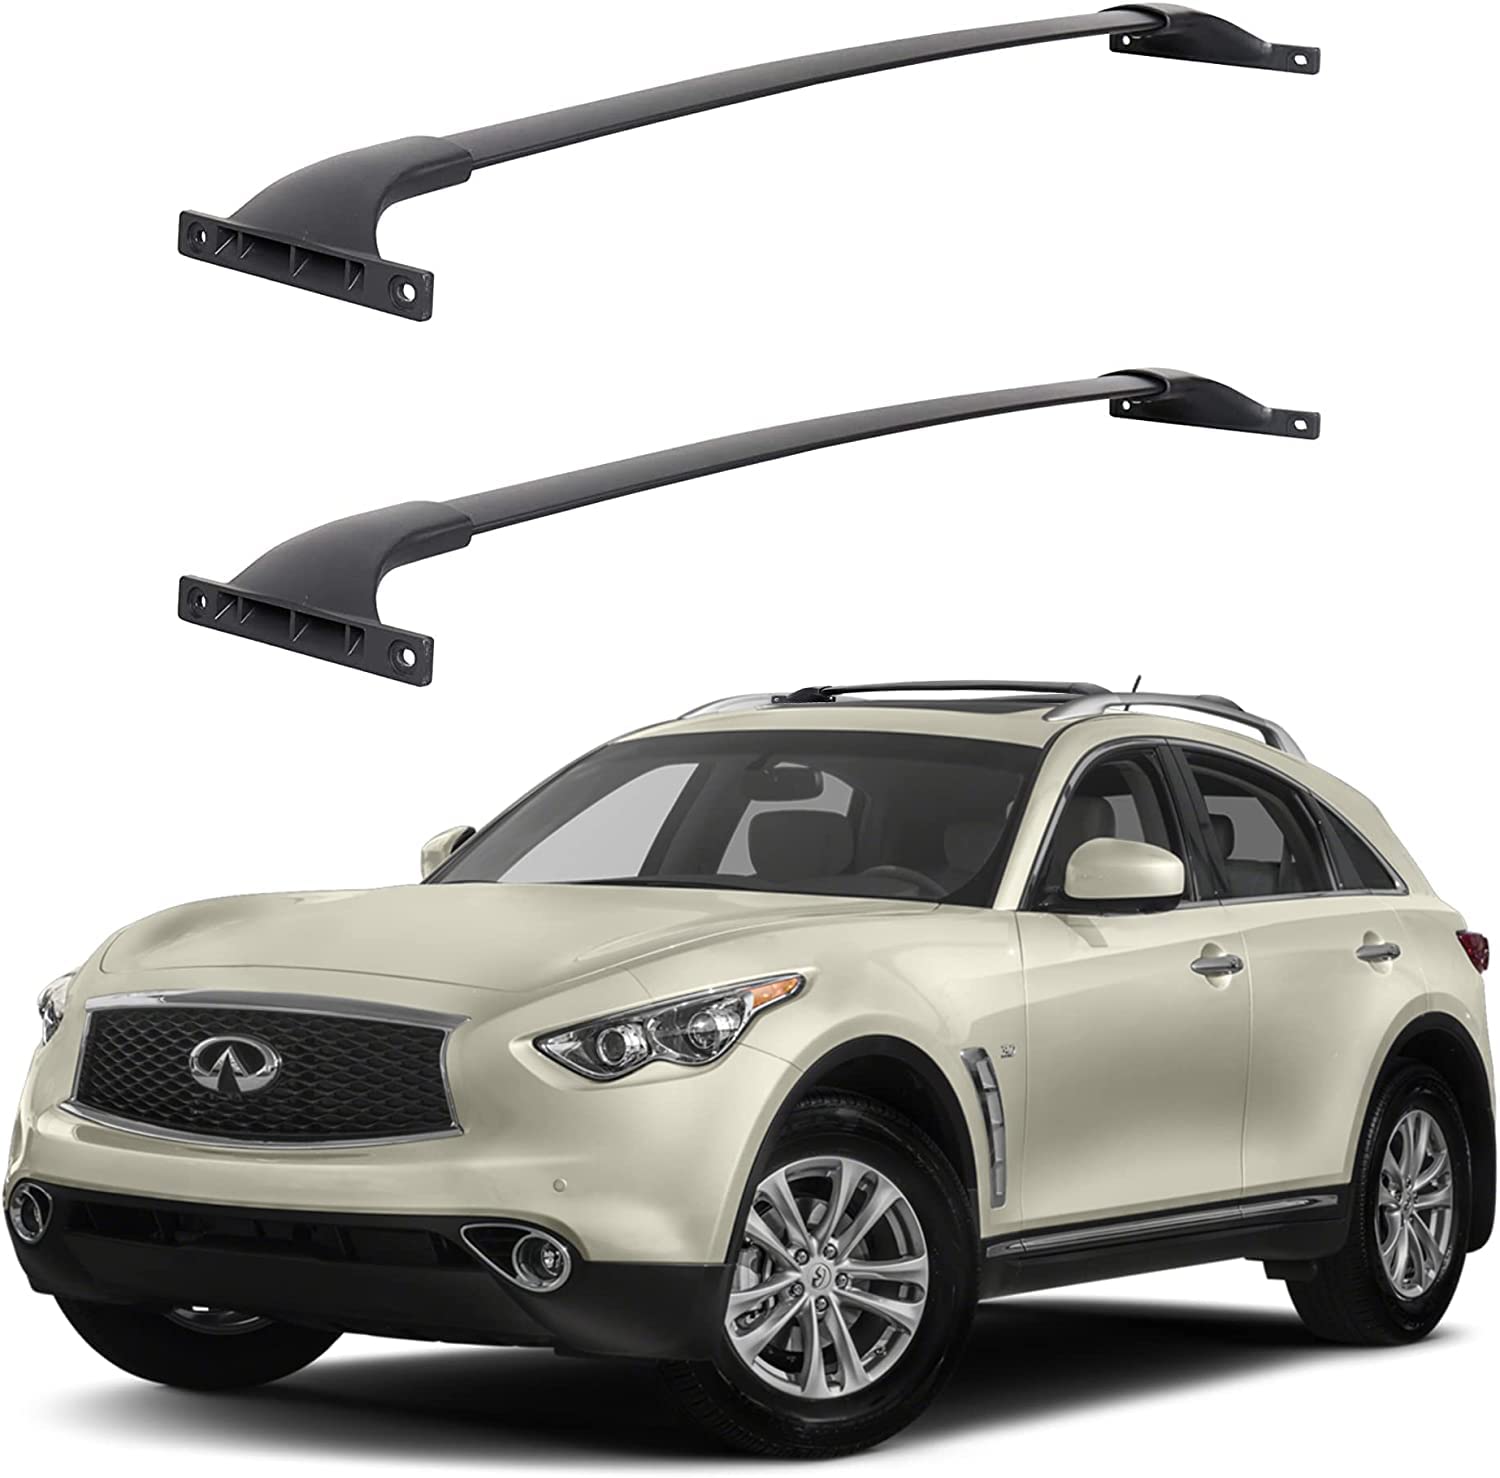 Car Roof Rack Crossbars - For Infiniti QX70 2014-2018 / Infiniti FX35 2011-2012/  Infiniti FX37 2013 Automotive Exterior Accessories - Cargo Carrier Top Of  Vehicle for Luggage Case Canoe Bike Snowboard